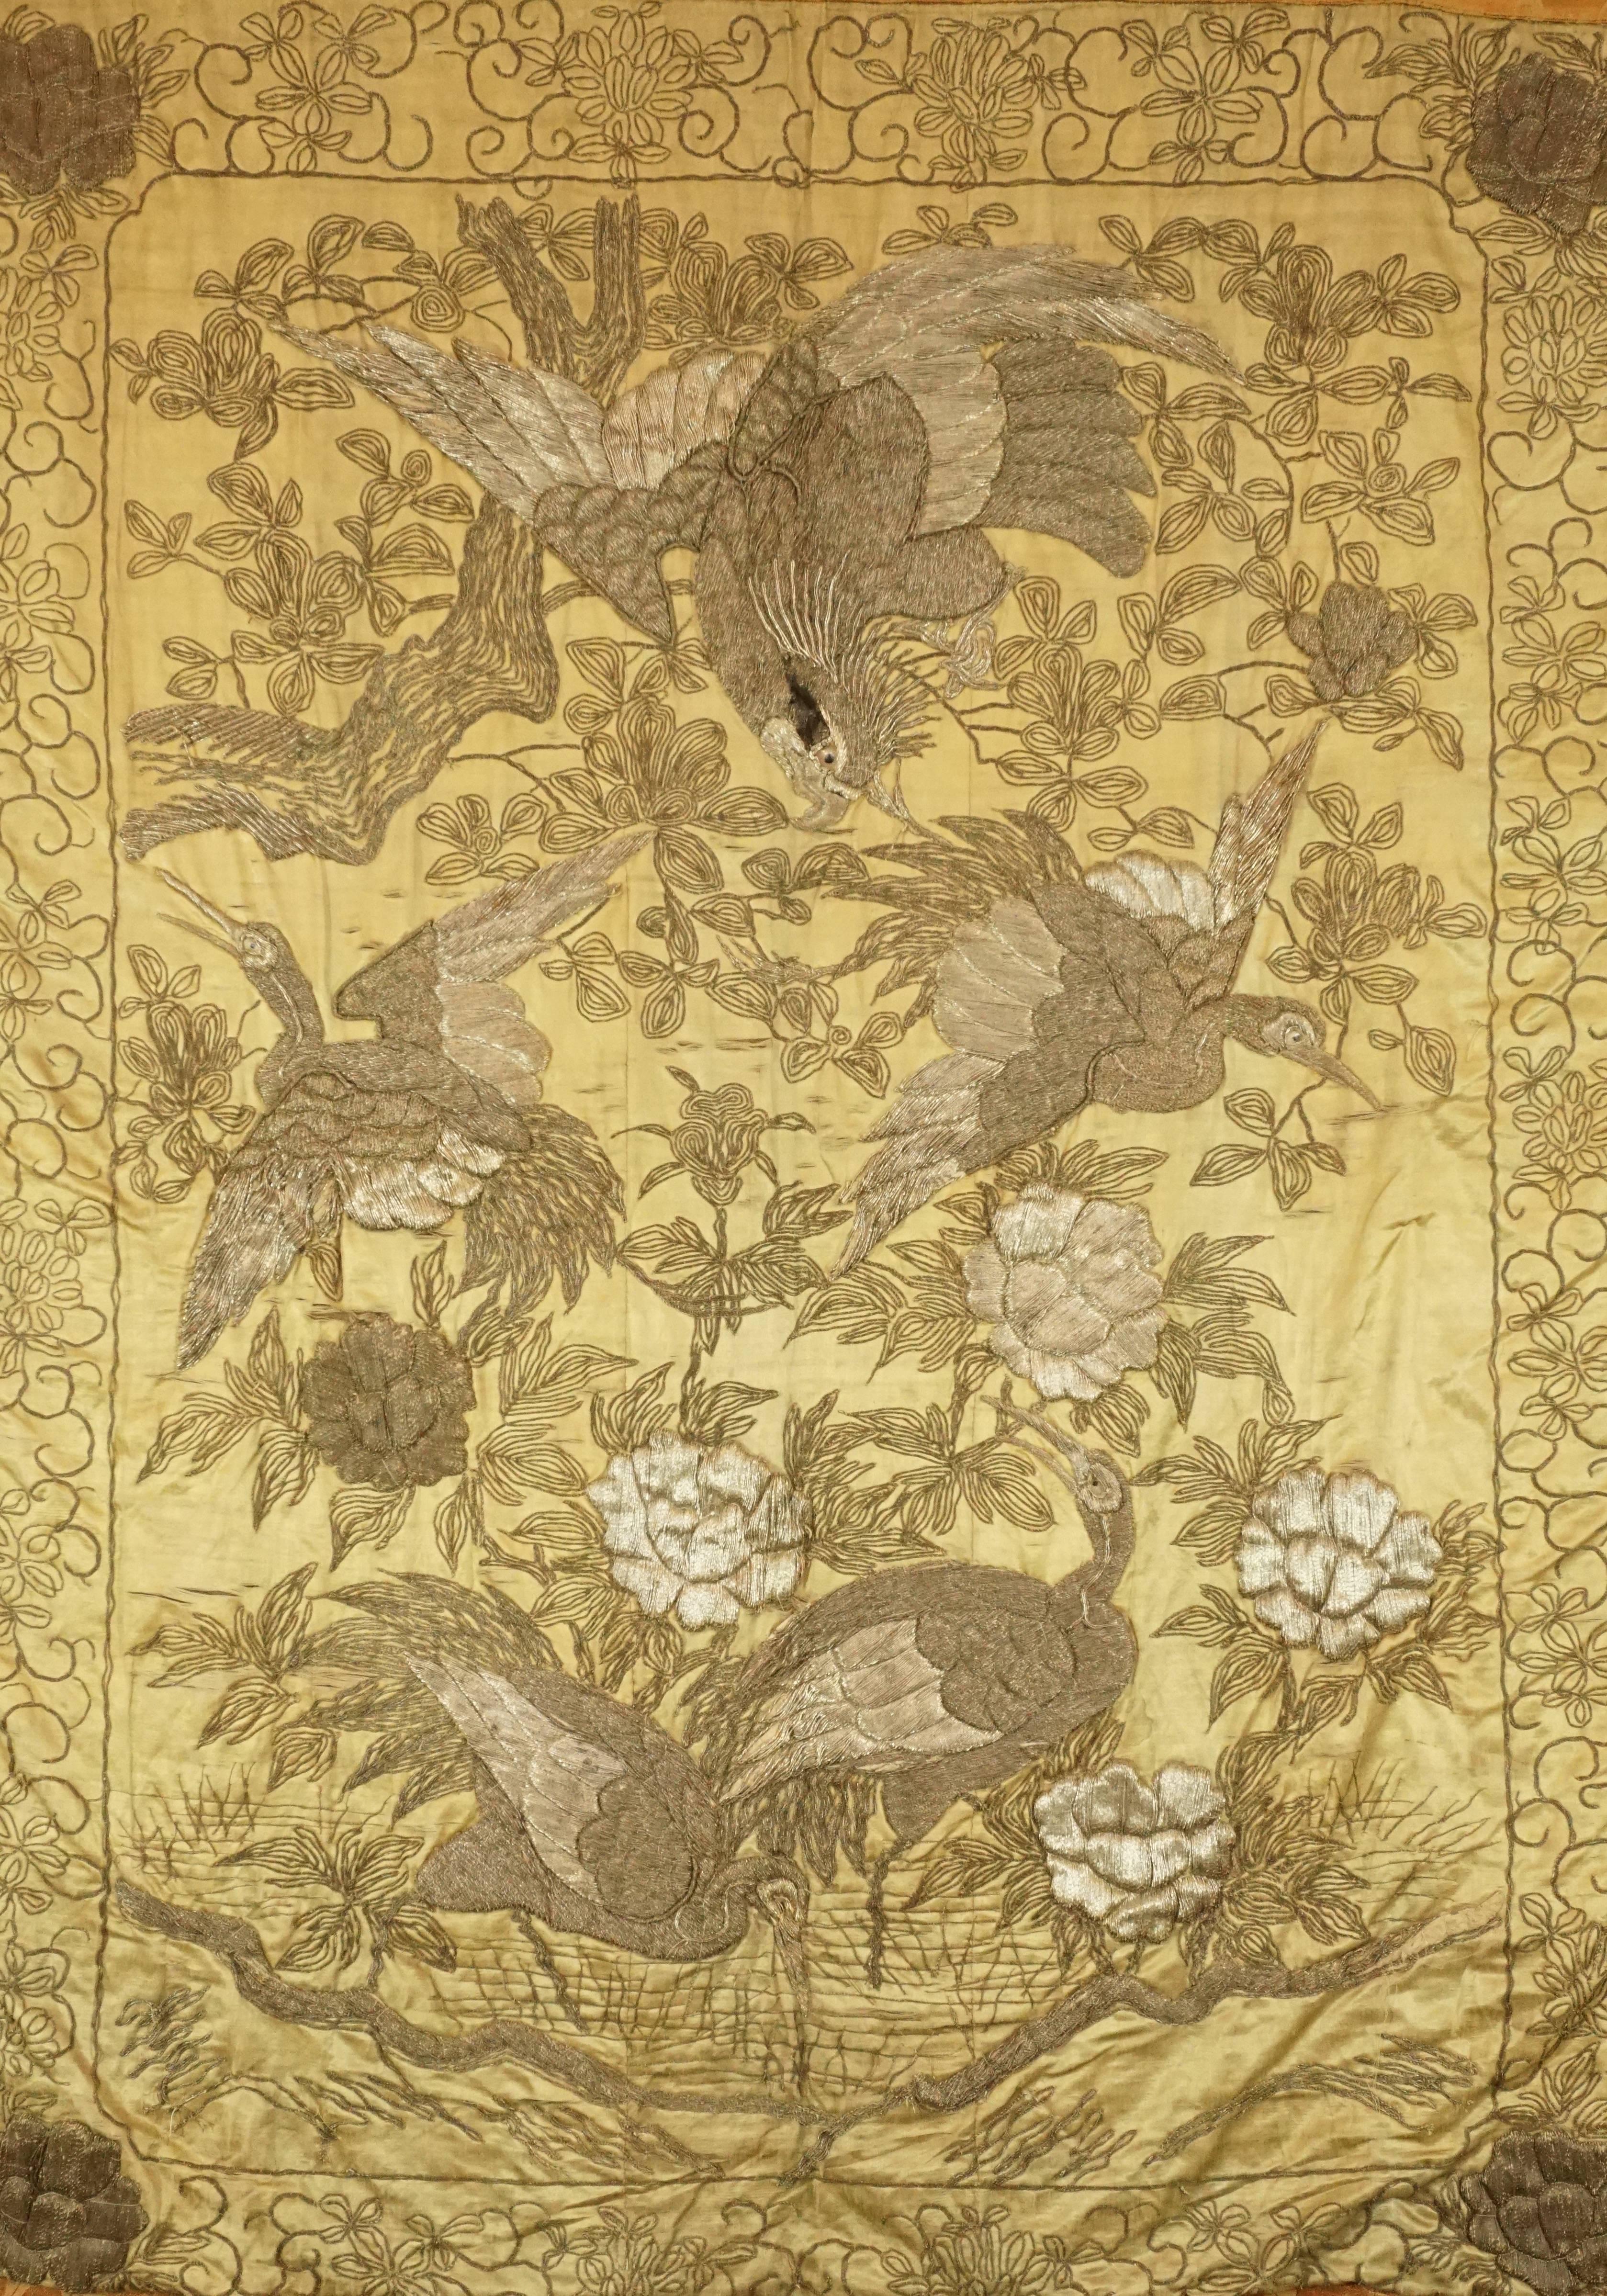 Japanese Meiji Period Silver Embroidery On Silk Of Hawk Attacking White Cranes. Ca. 1885 . Entwined silver threading and other yarns and are meticulously embroidered with texture and depth on gold colored silk to create a majestic and dramatic scene